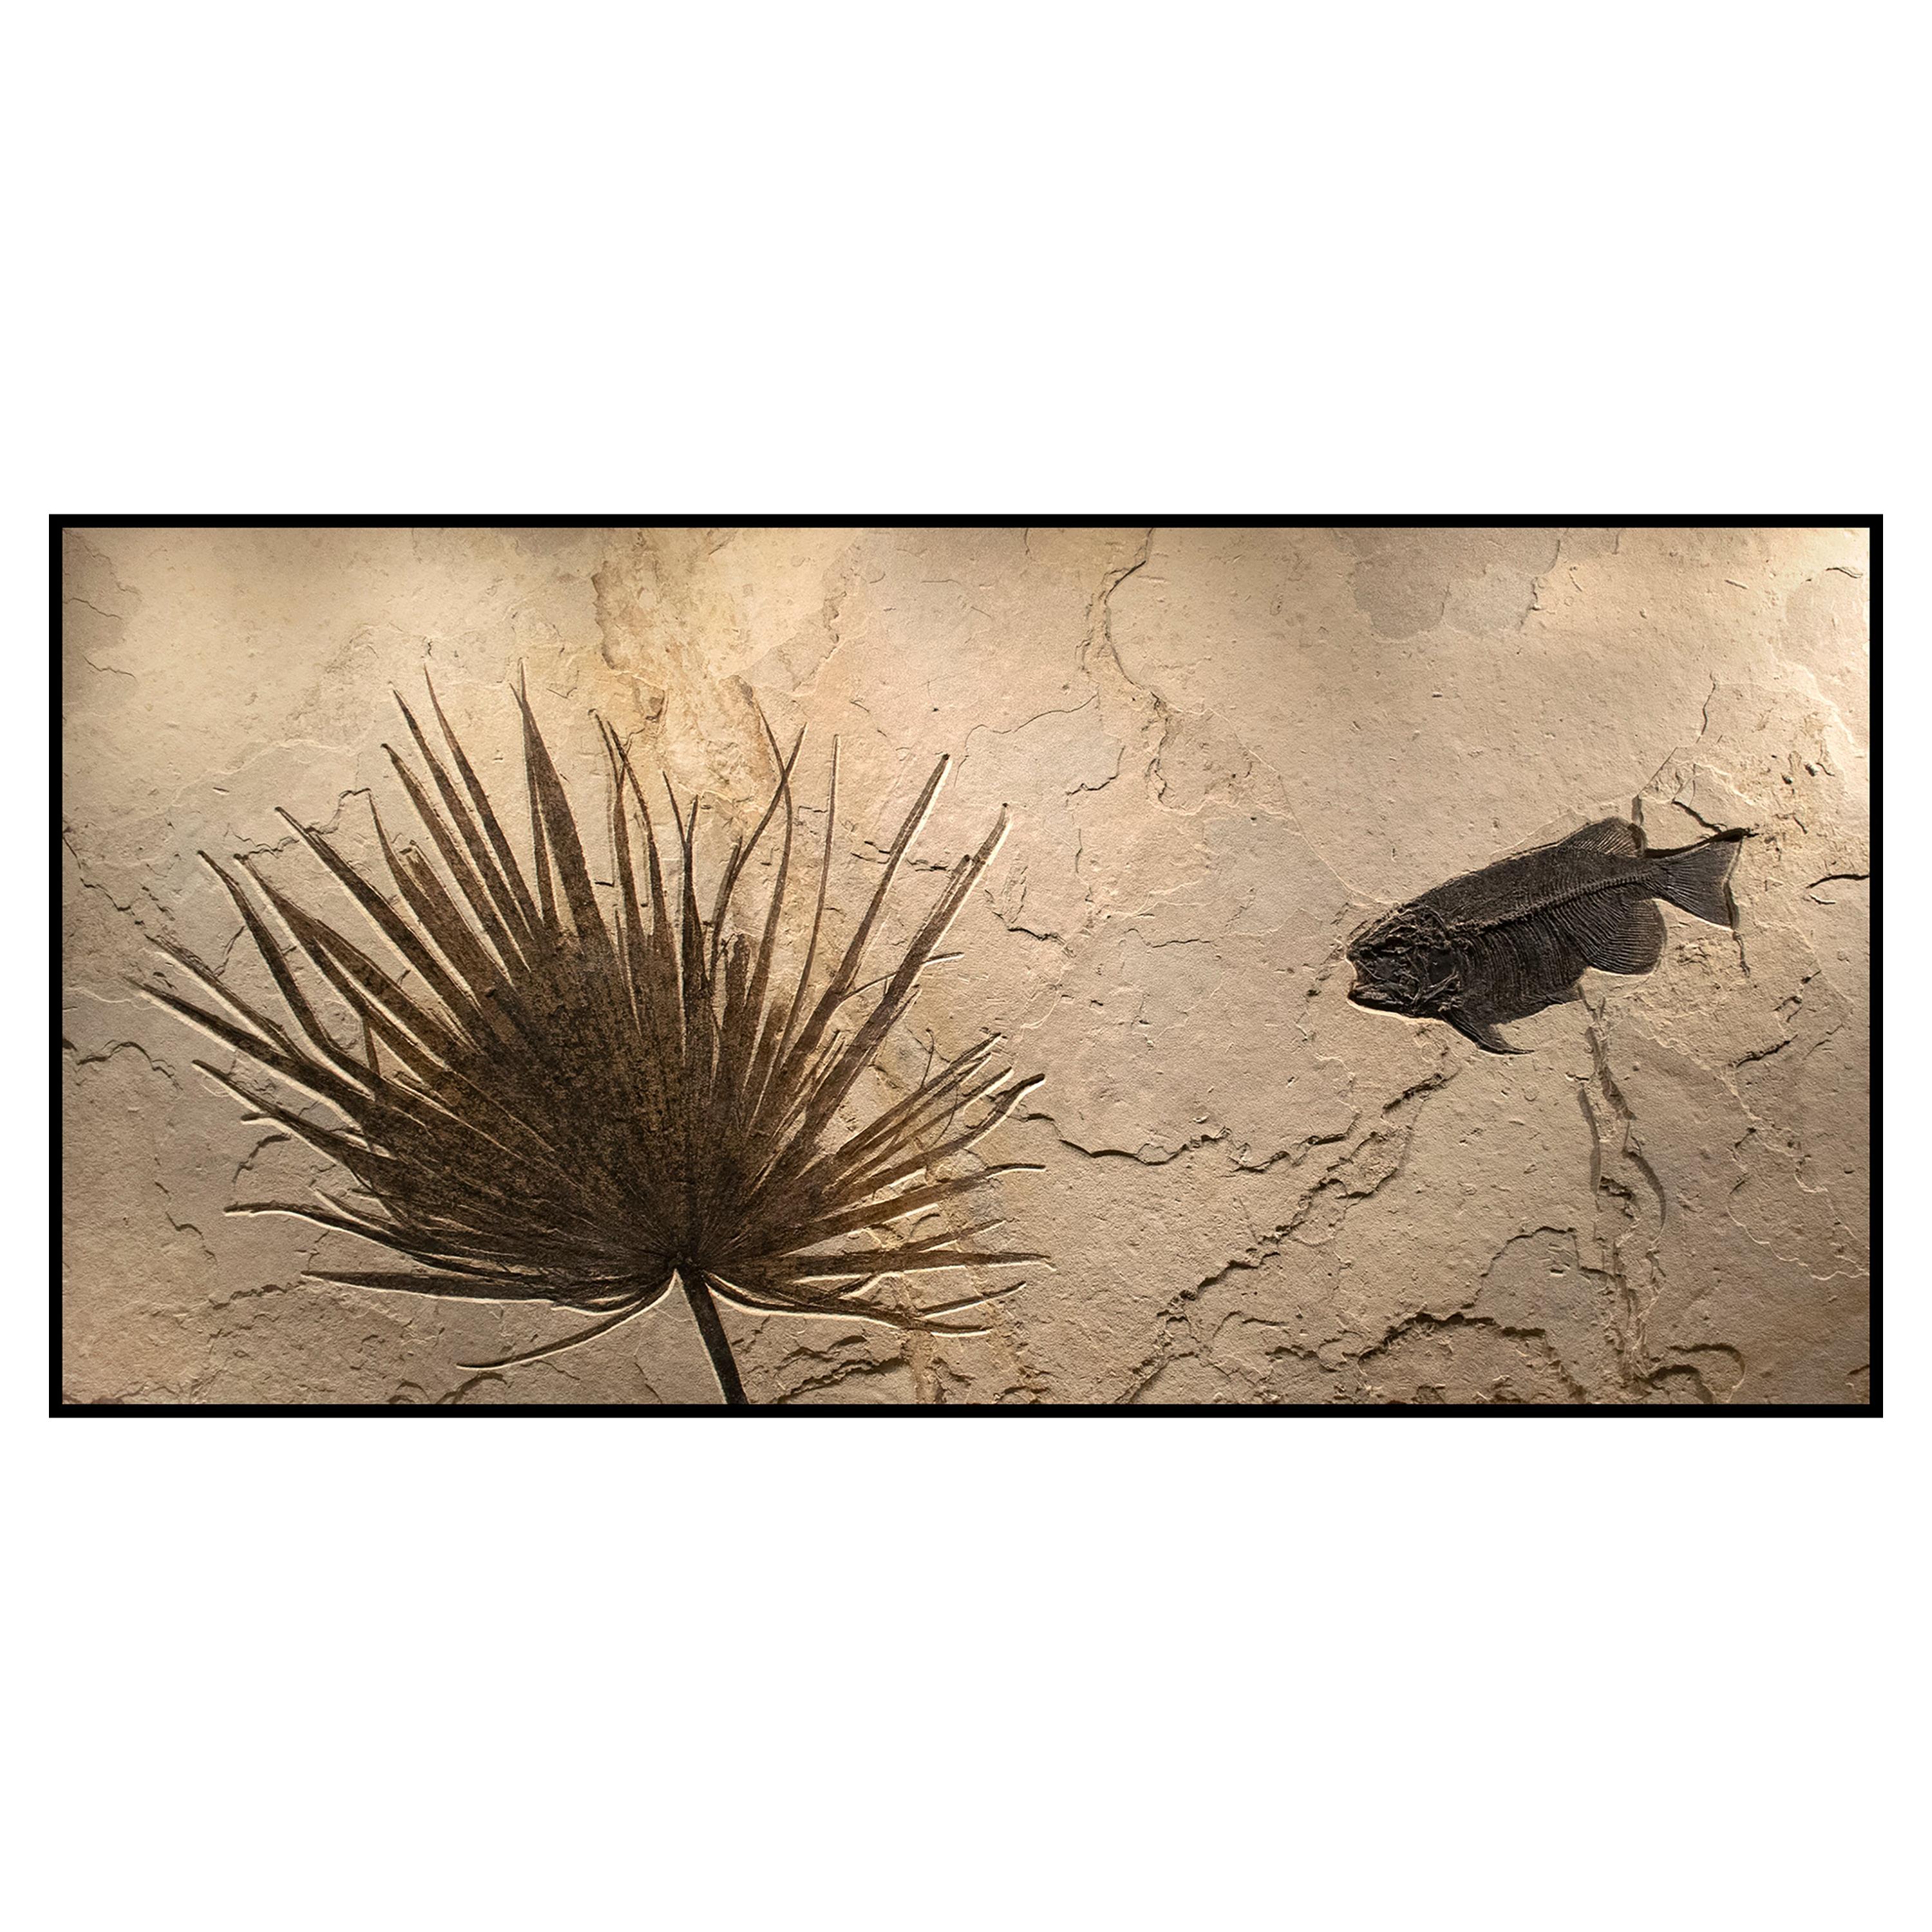 50 Million Year Old Eocene Era Fossil Palm & Fossil Fish in Stone, from Wyoming